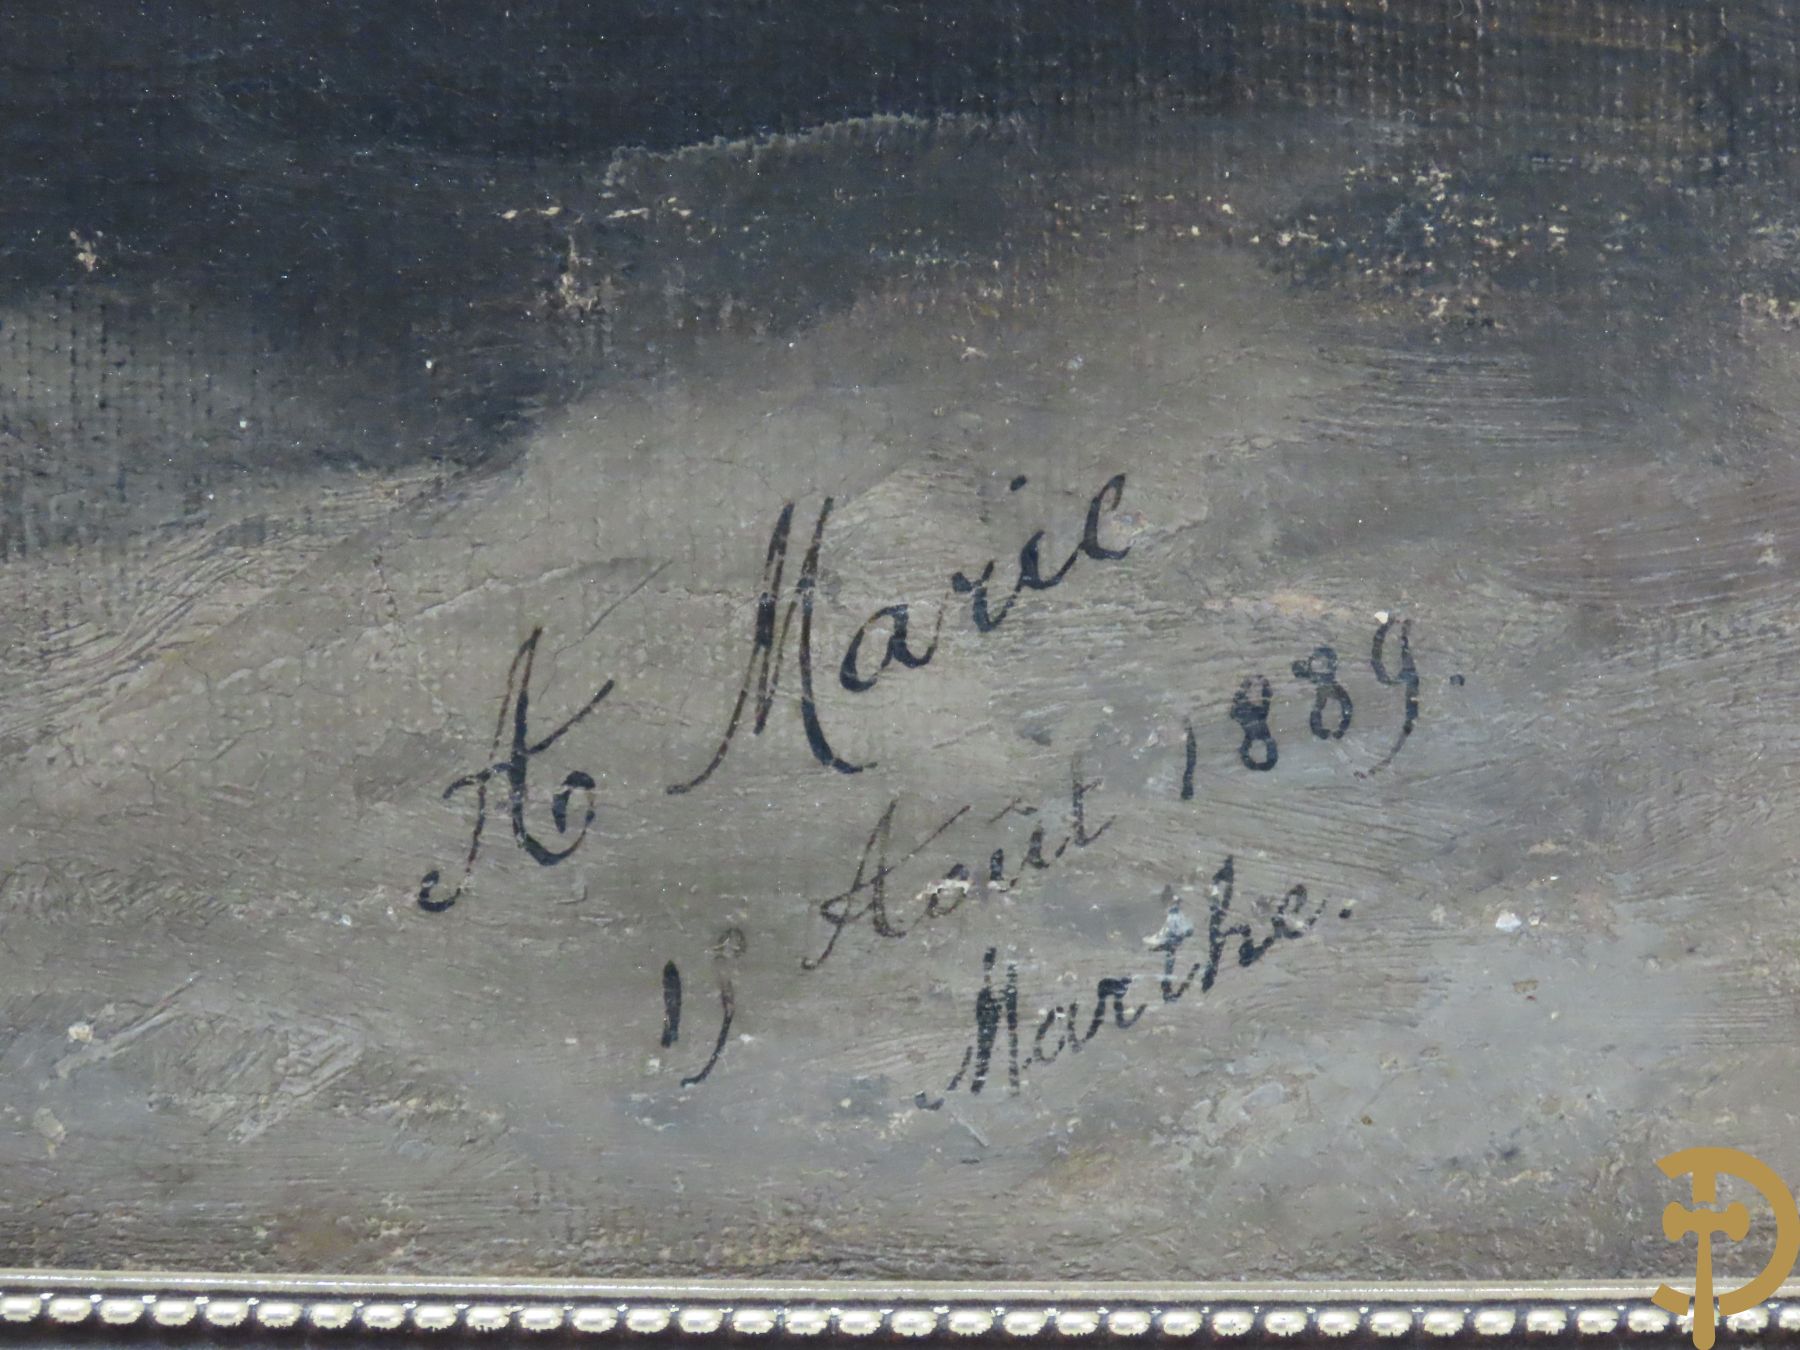 MARIE A. get. 19 Aout 1889 